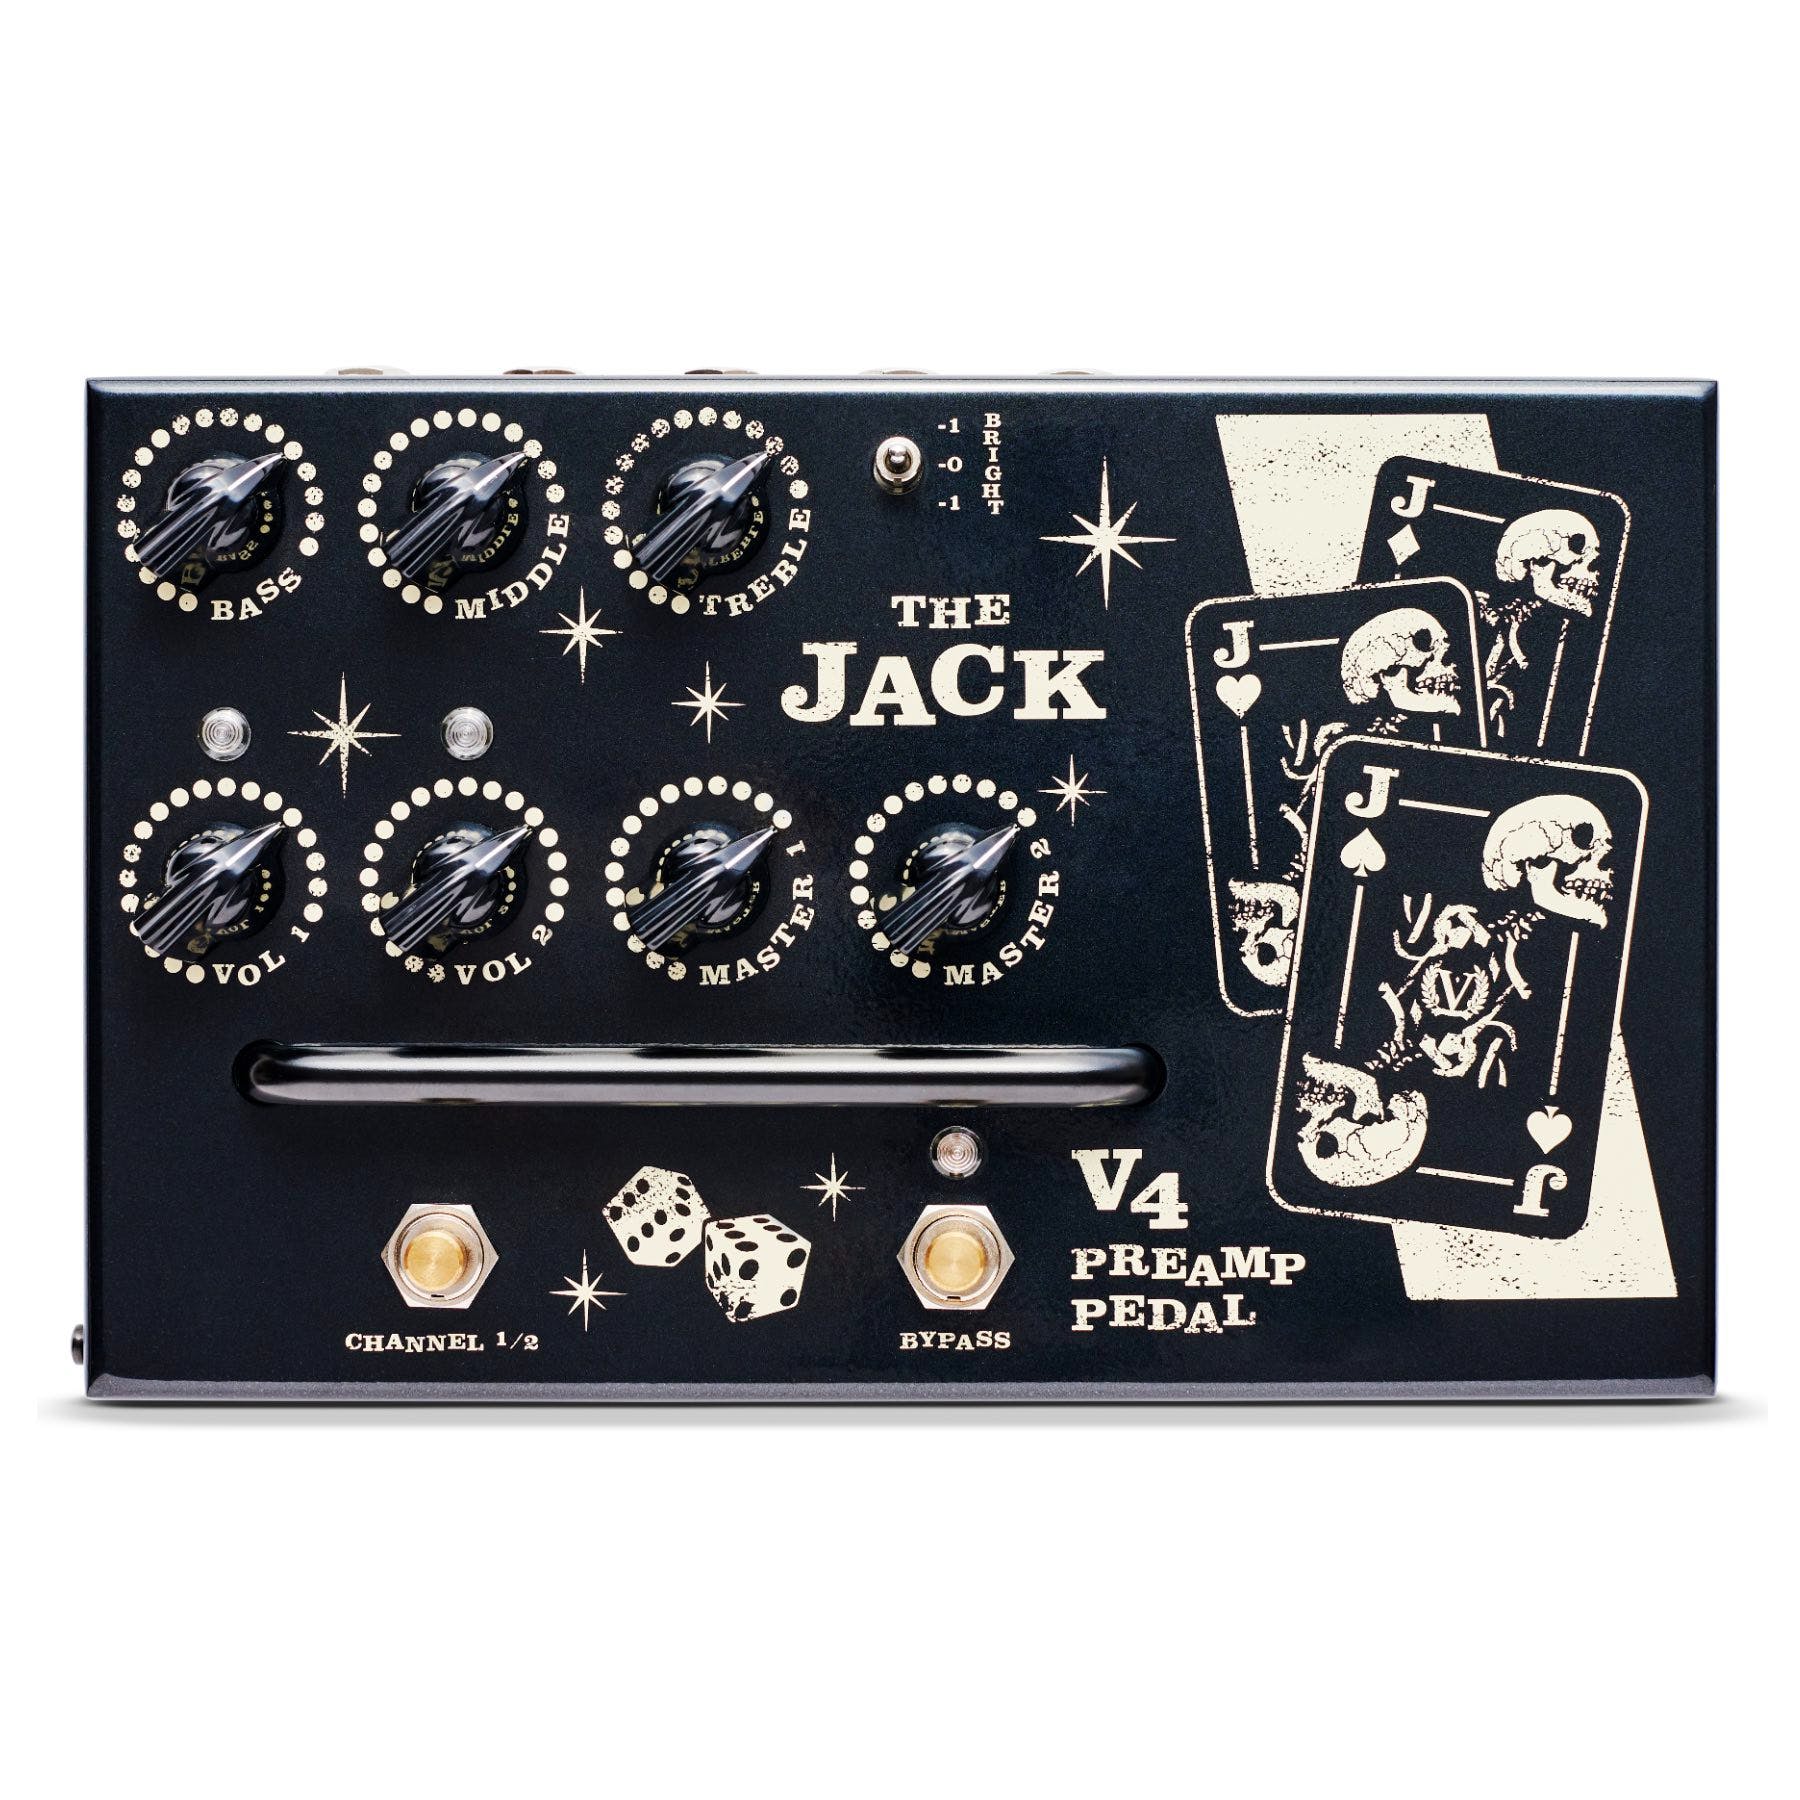 Victory Effects Victory V4 'the Jack' Preamp Pedal